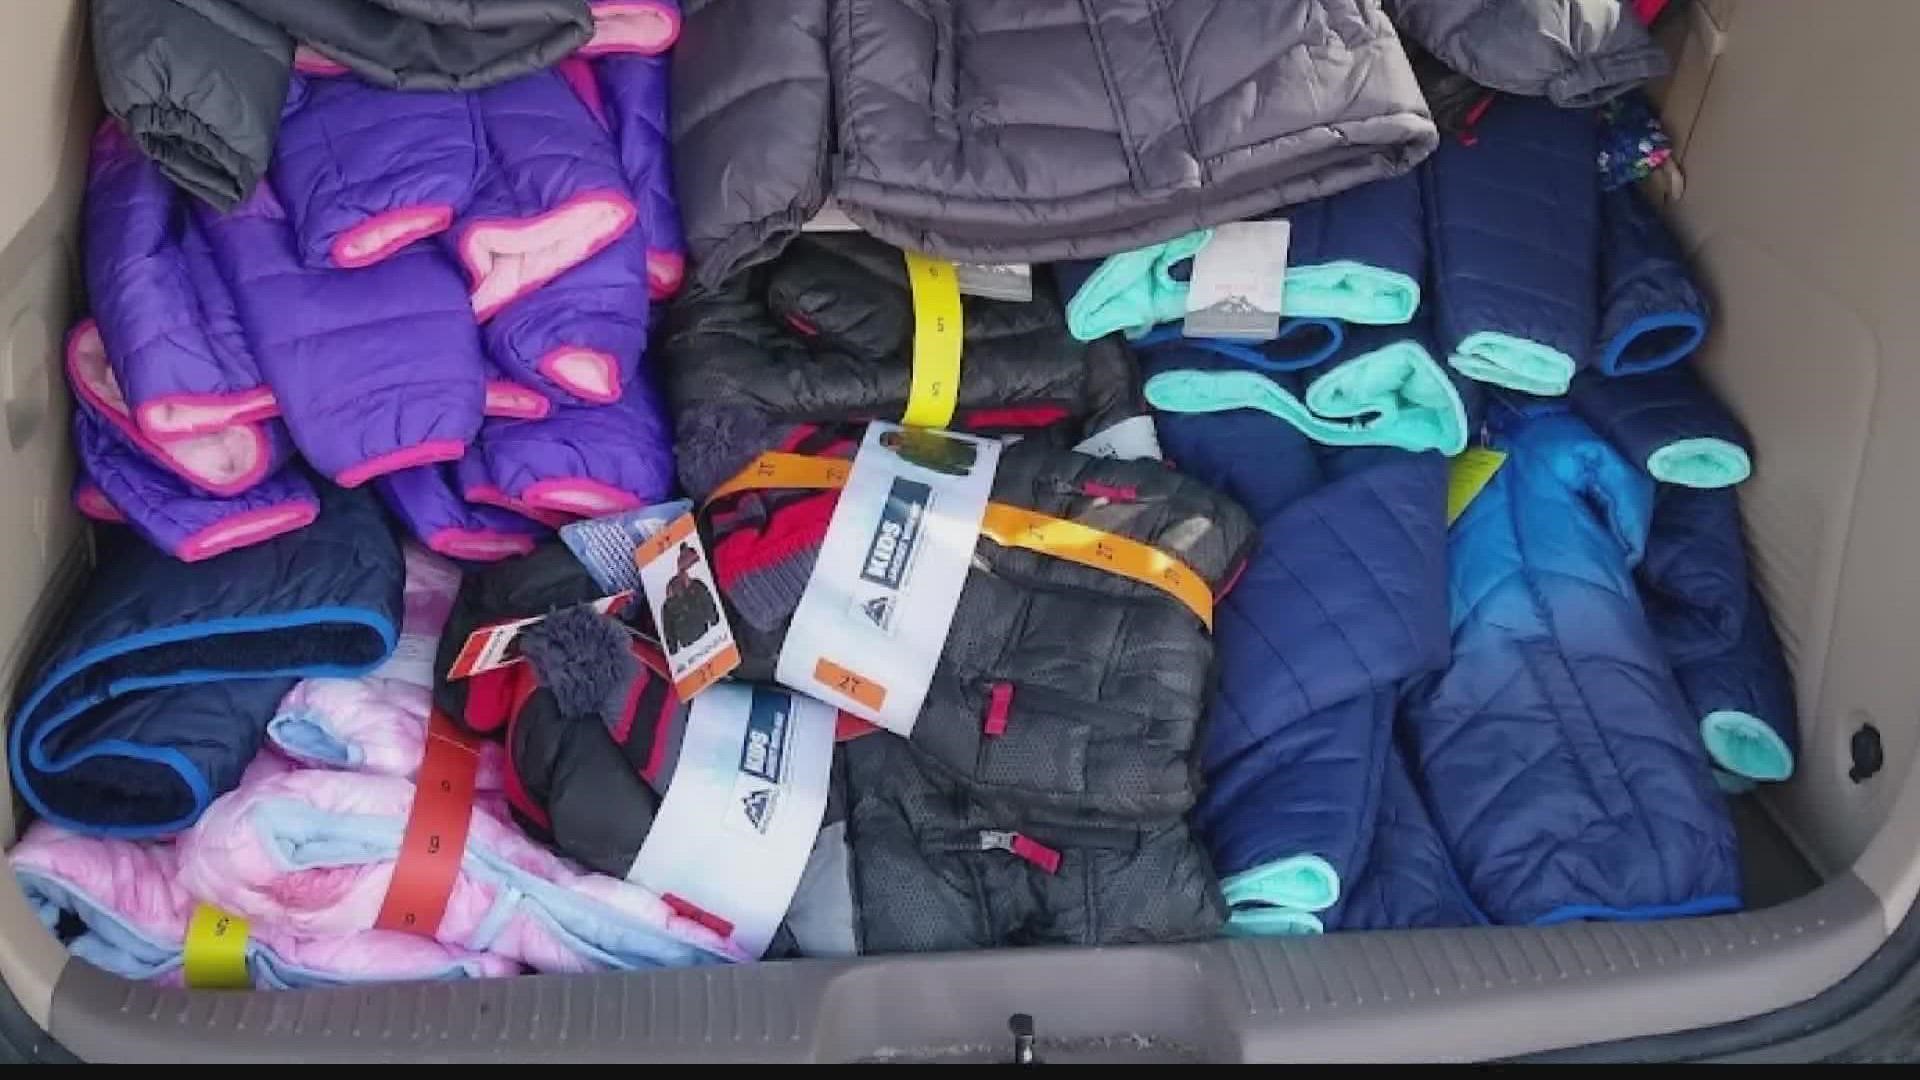 A Johnson County pastor is calling on the community to donate warm clothes and winter coats to help Afghan evacuees staying at Camp Atterbury.